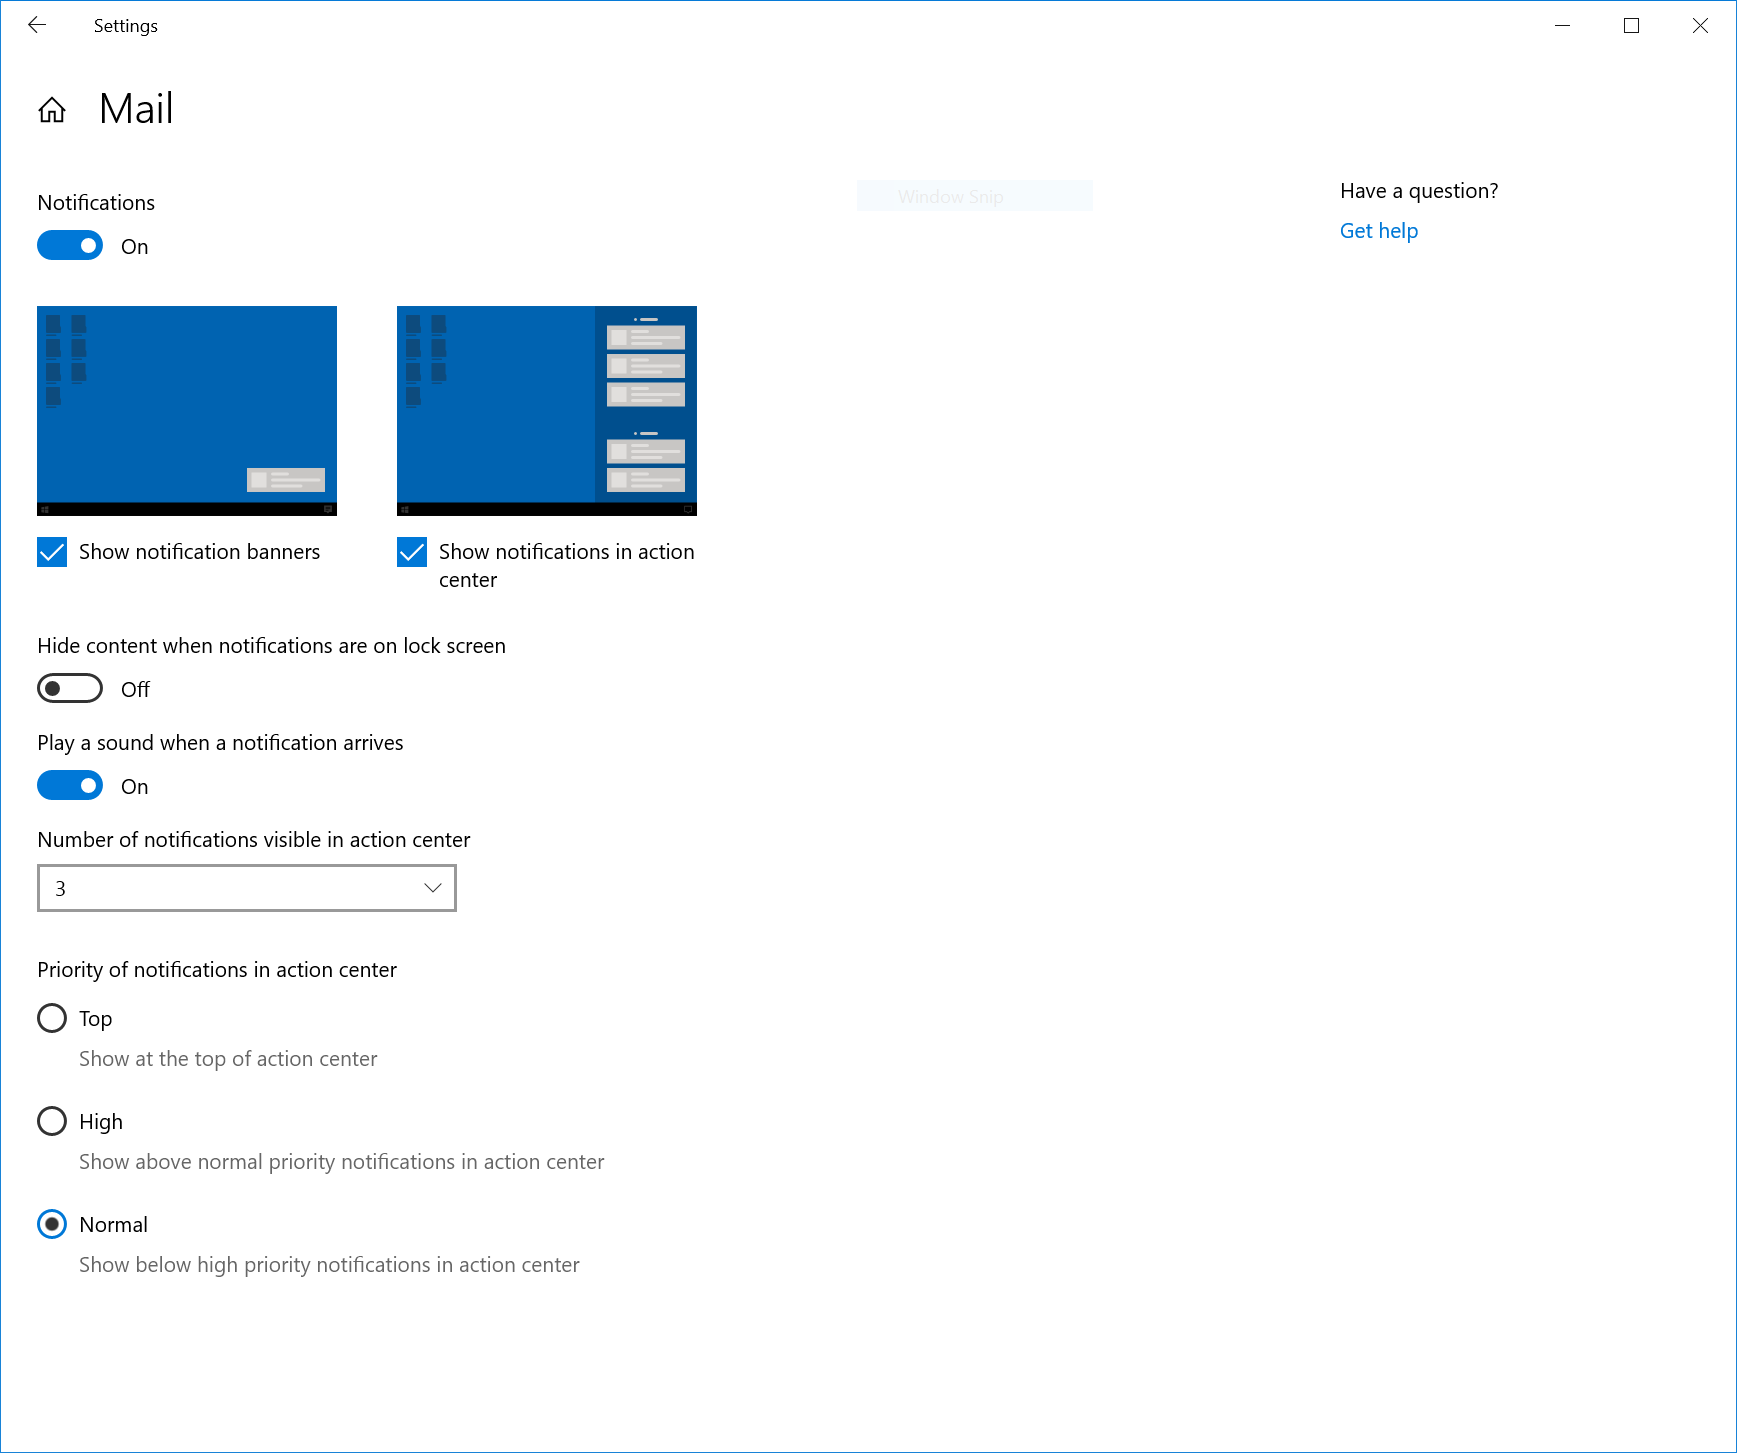 What is new in Windows 10 version 1909 6c36cef63ea624500333417377850ba7.png